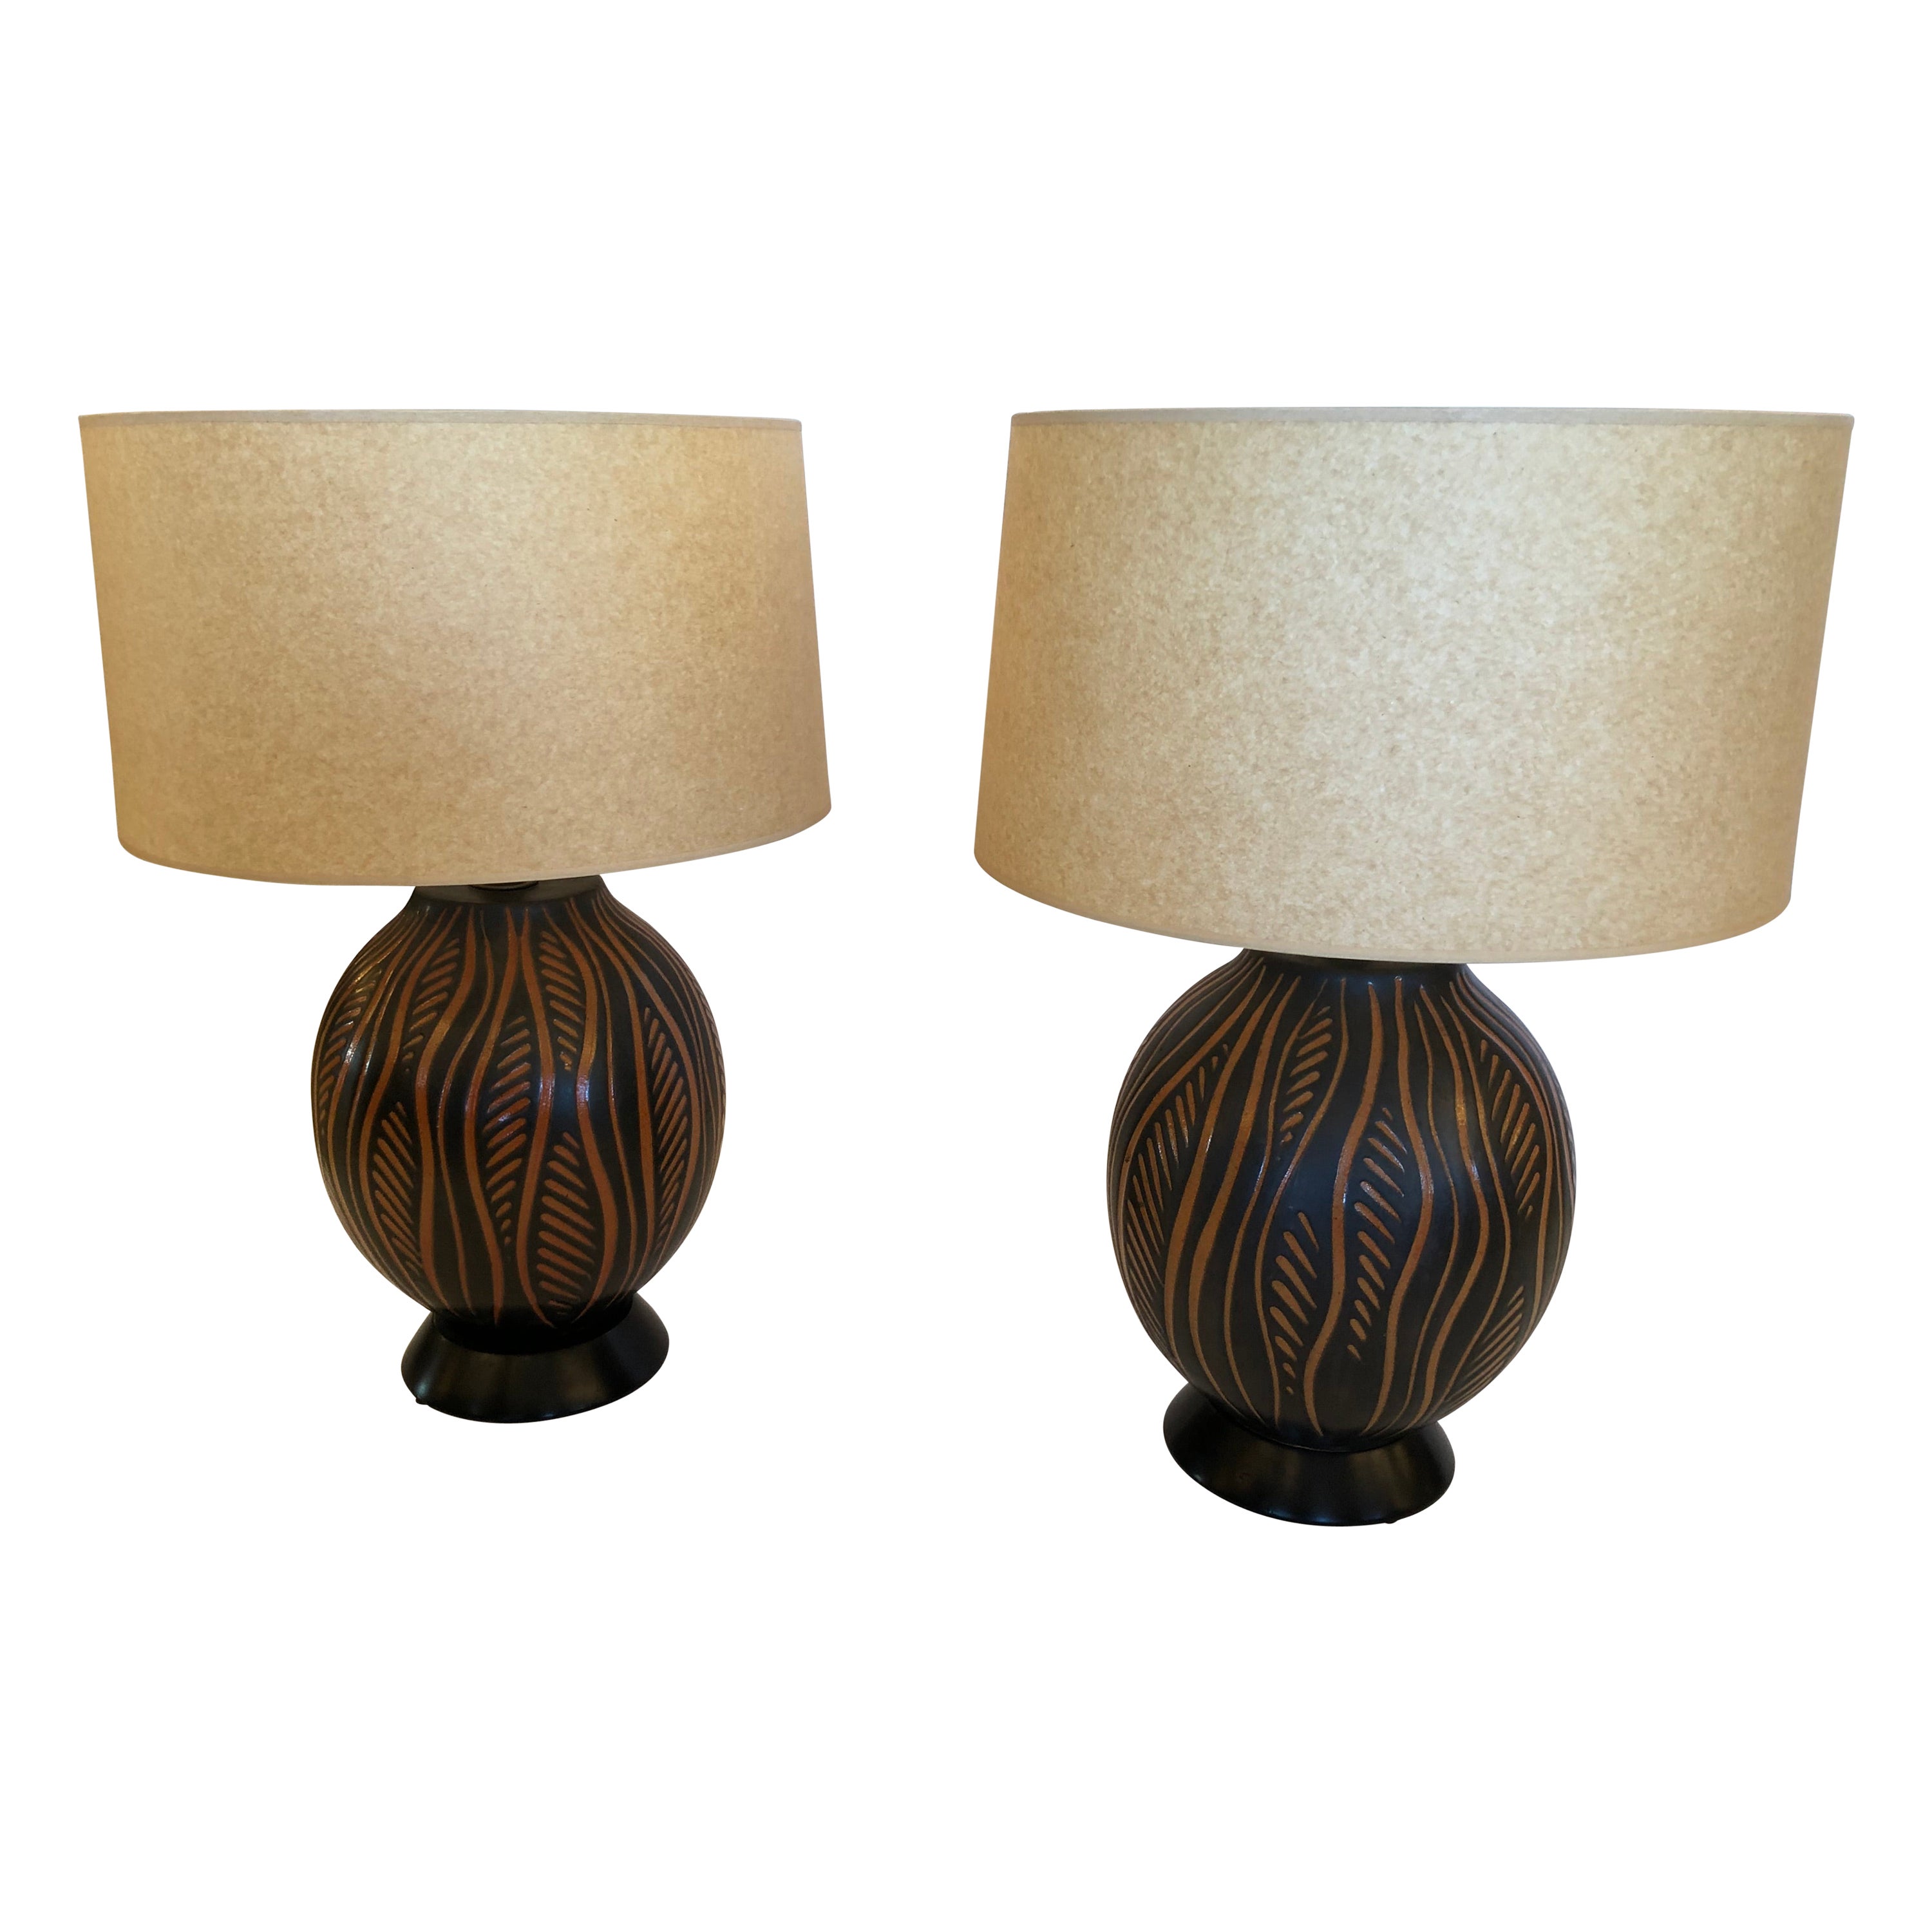 Handsome Pair of Black & Orange Hand Crafted Pottery Table Lamps